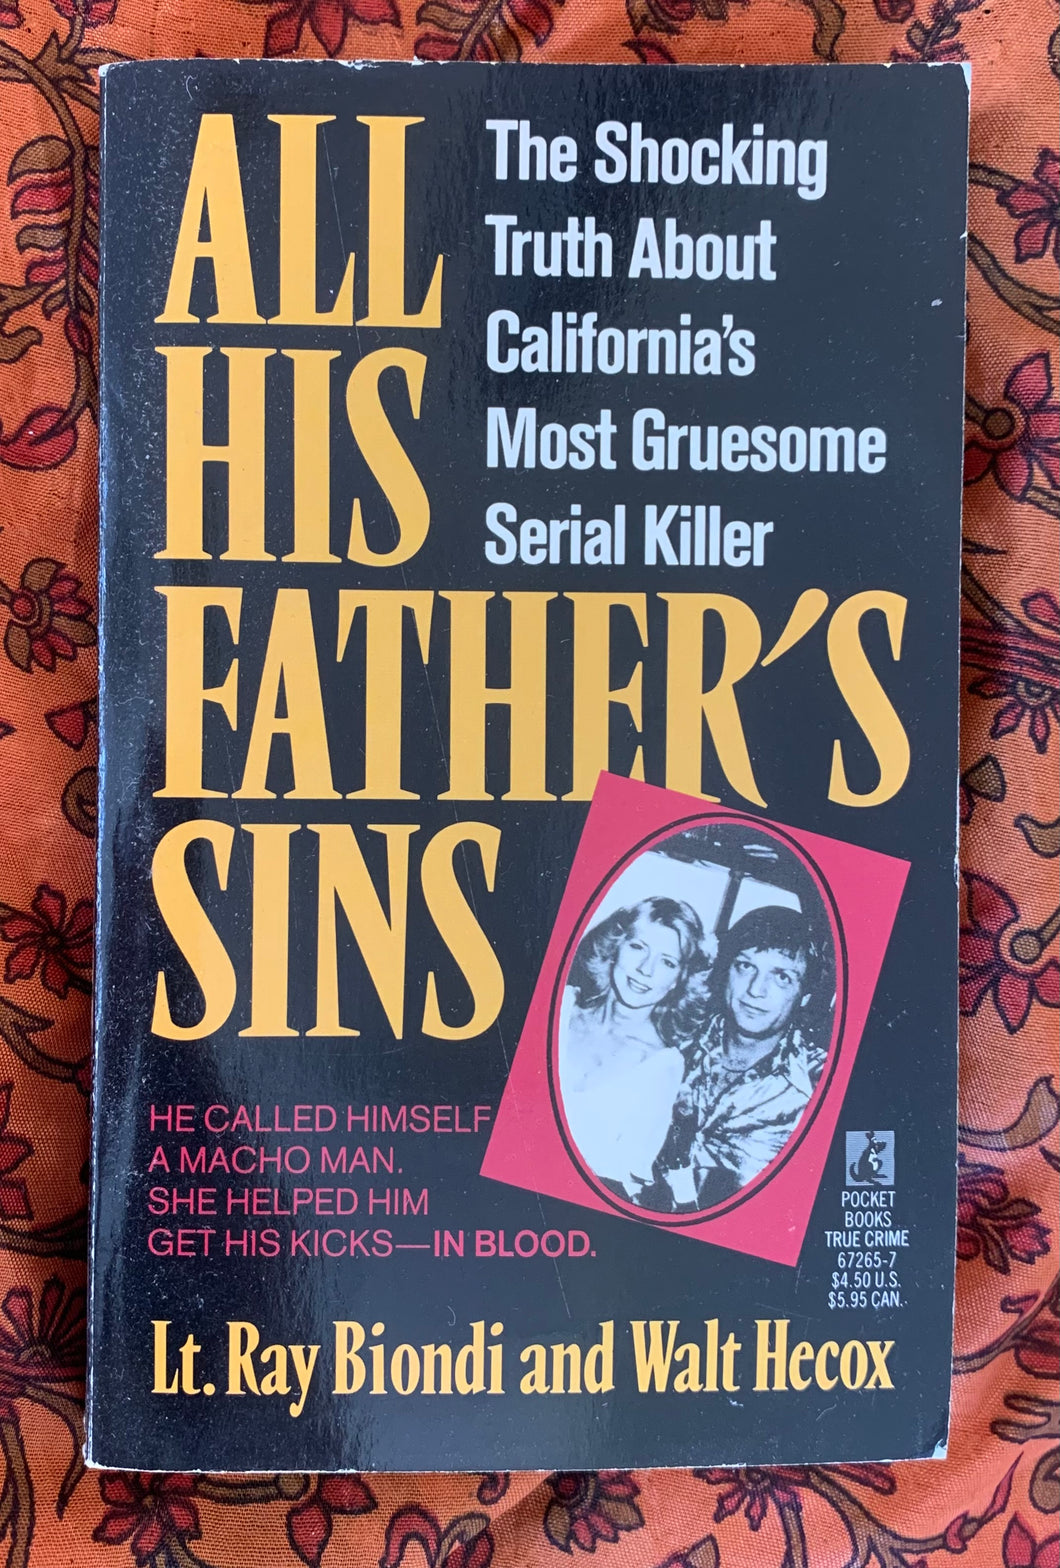 All His Father's Sins: The Shocking Truth About California's Most Gruesome Serial Killer